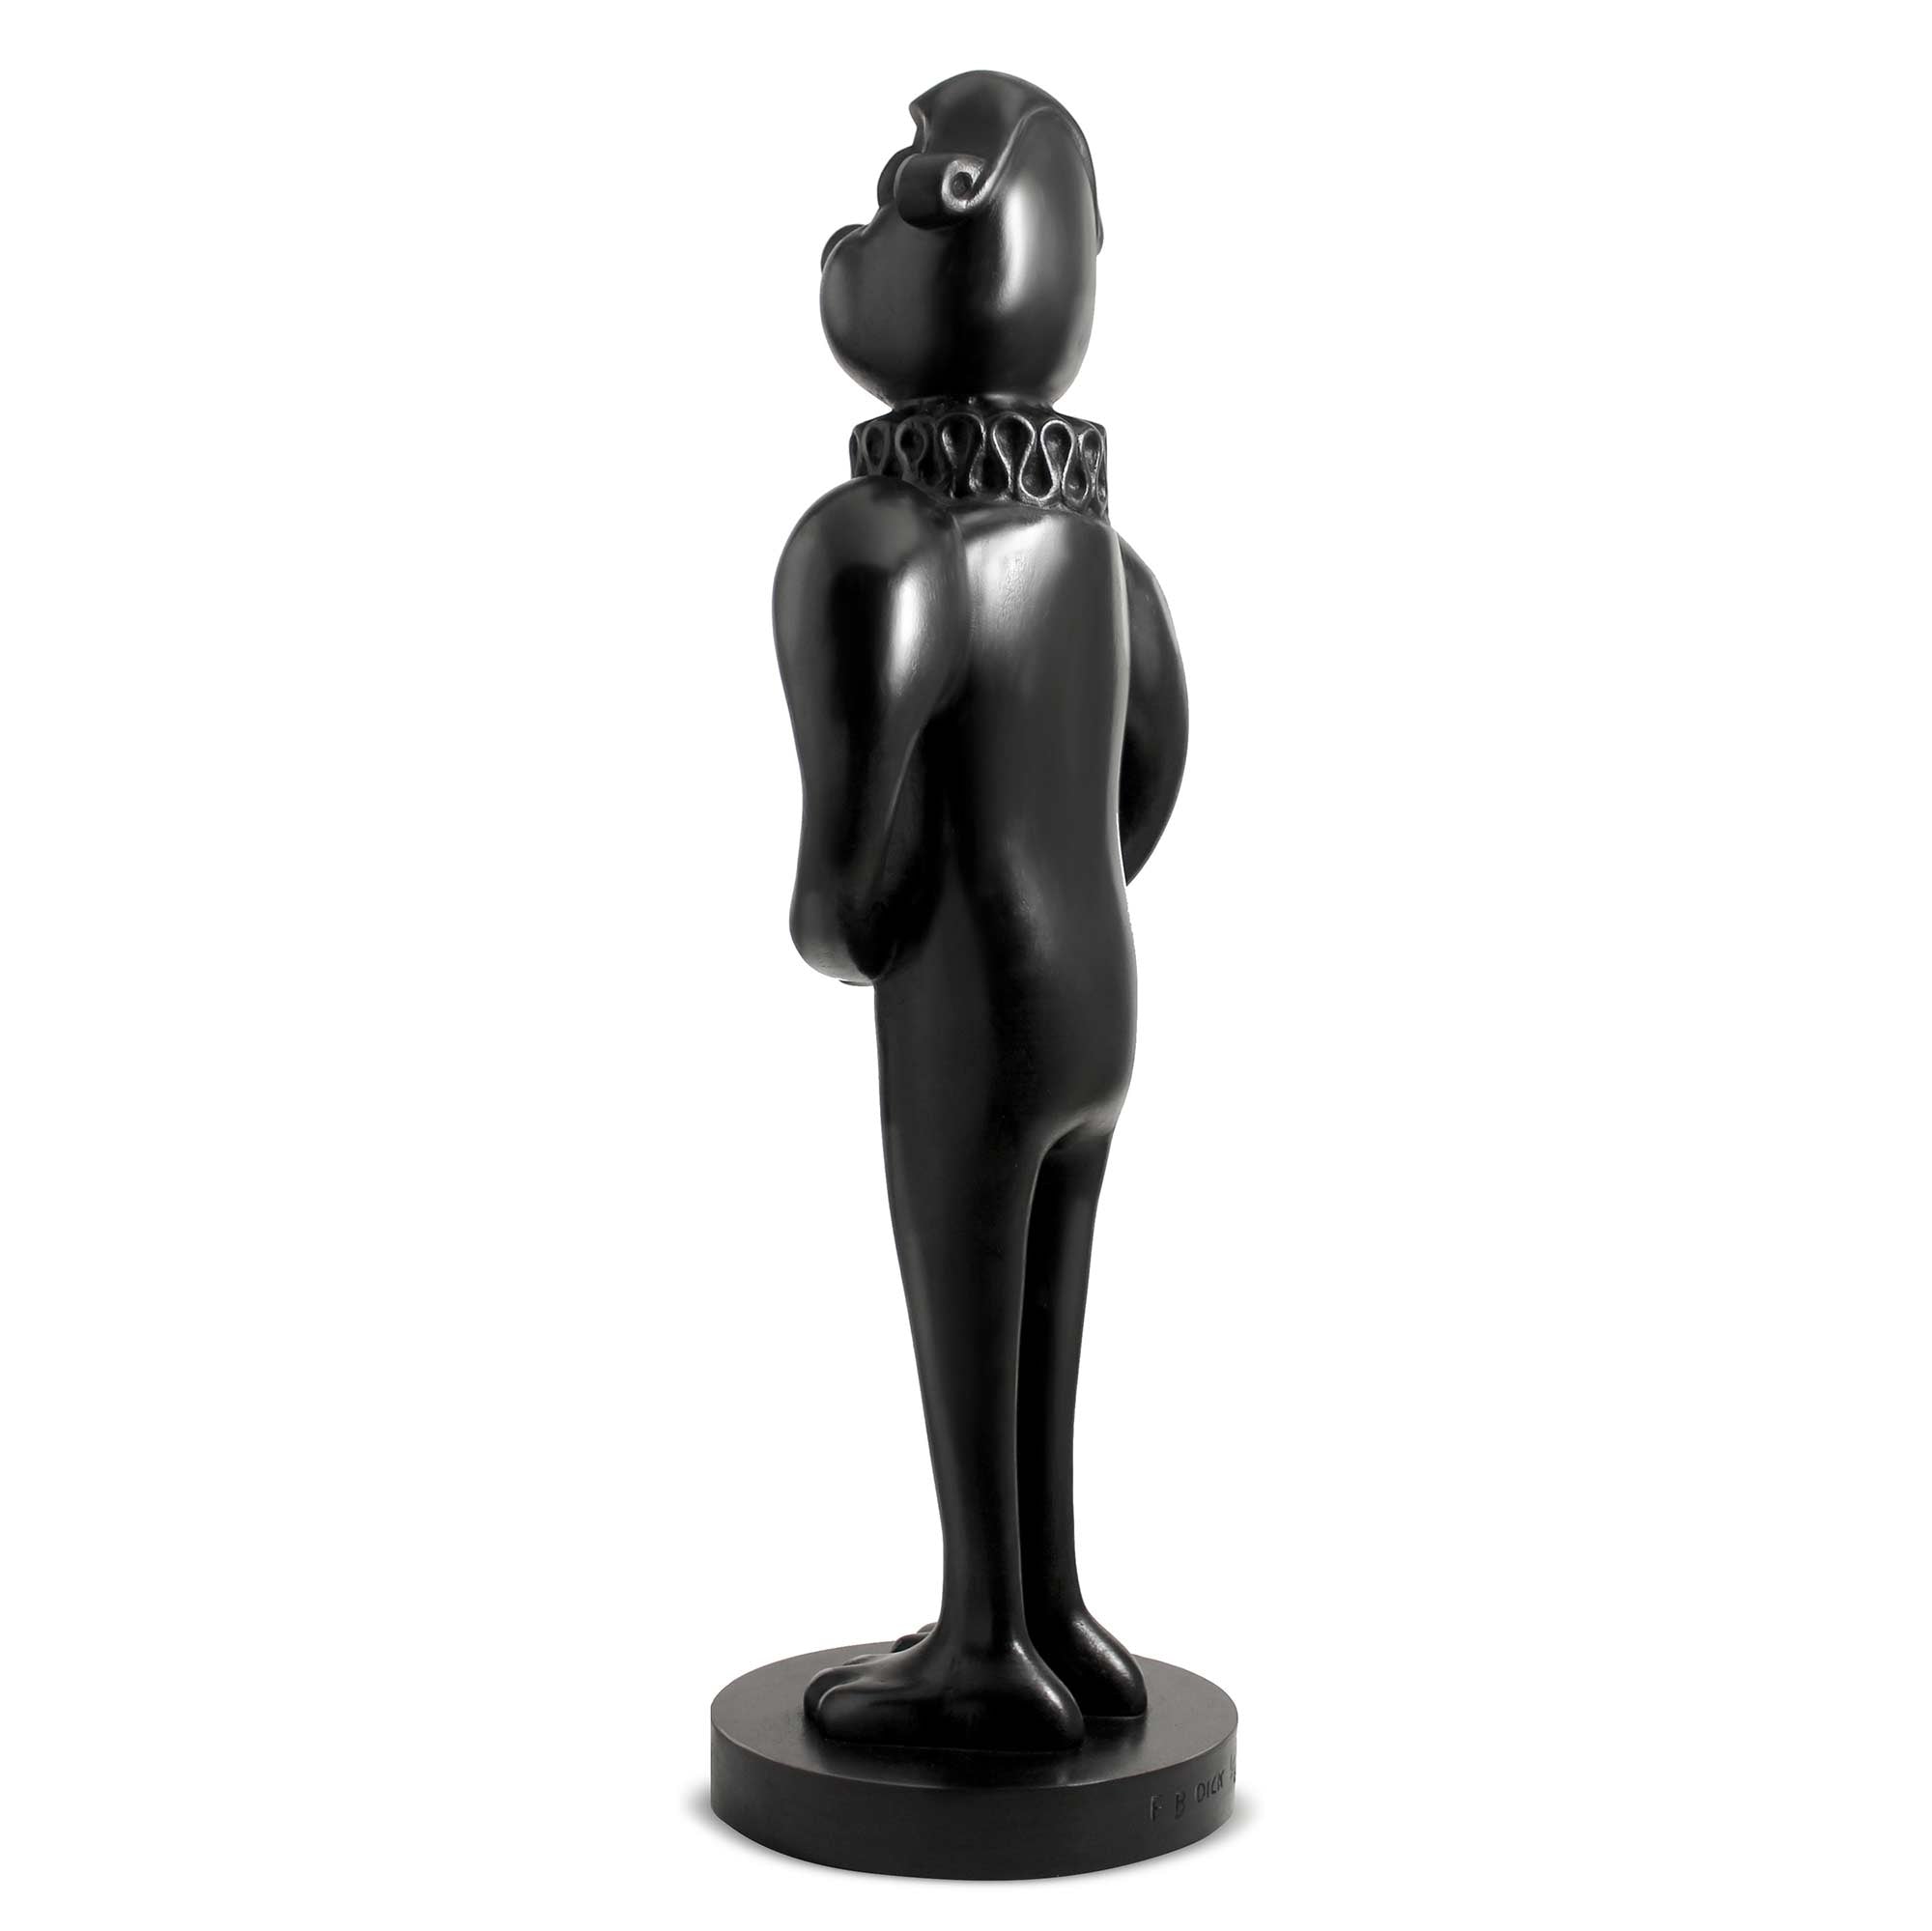 William, dog wood sculpture with black polished, by artist Ferdi B Dick, side back view